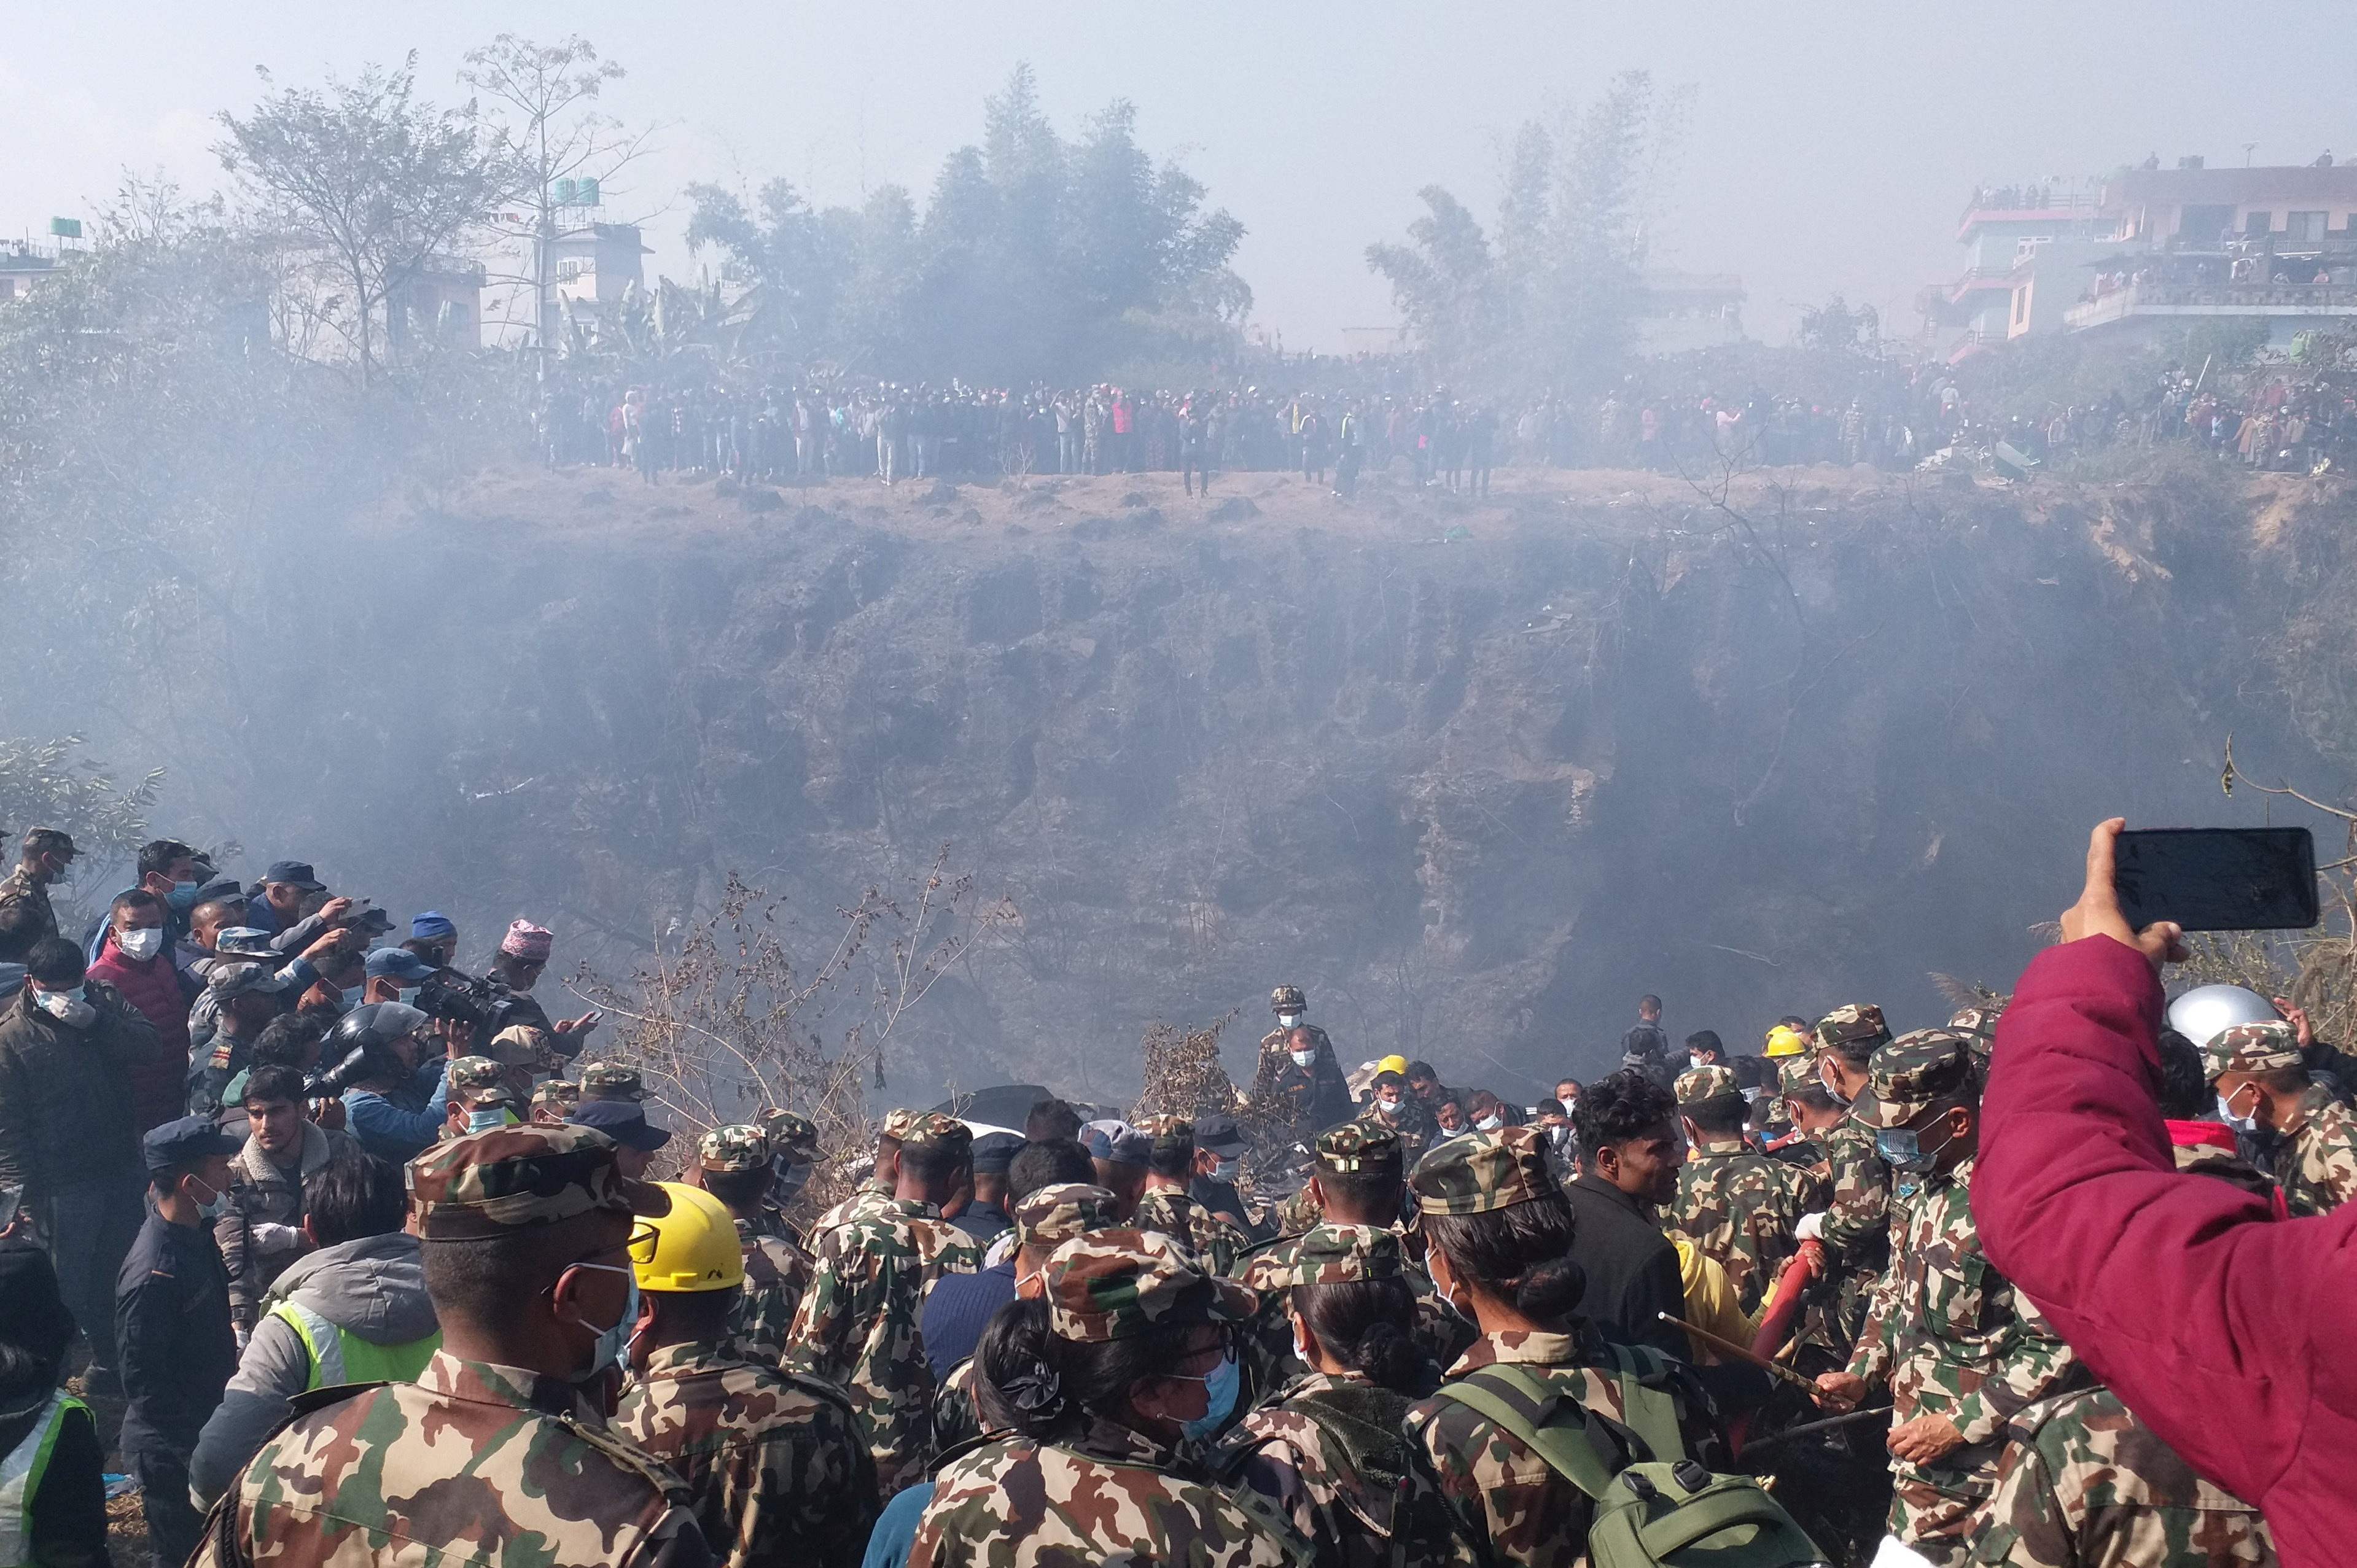 Nepalese authorities have recovered at least 25 bodies since the crash, Nepal Police Deputy Inspector General Rudra Thapa said.  (Reuters)